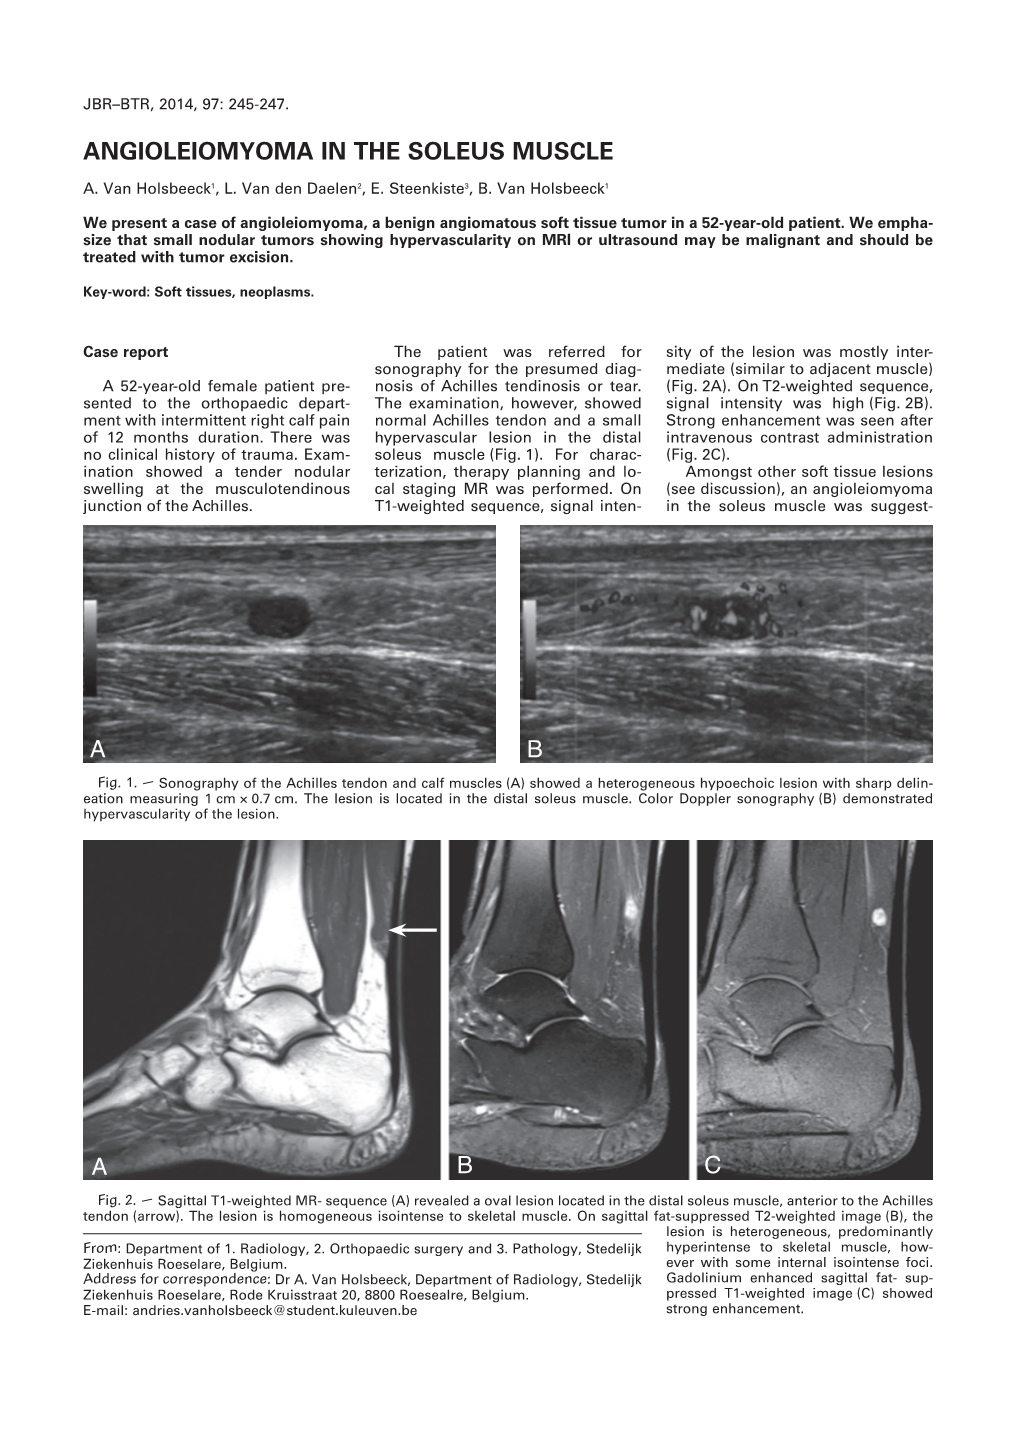 Angioleiomyoma in the Soleus Muscle